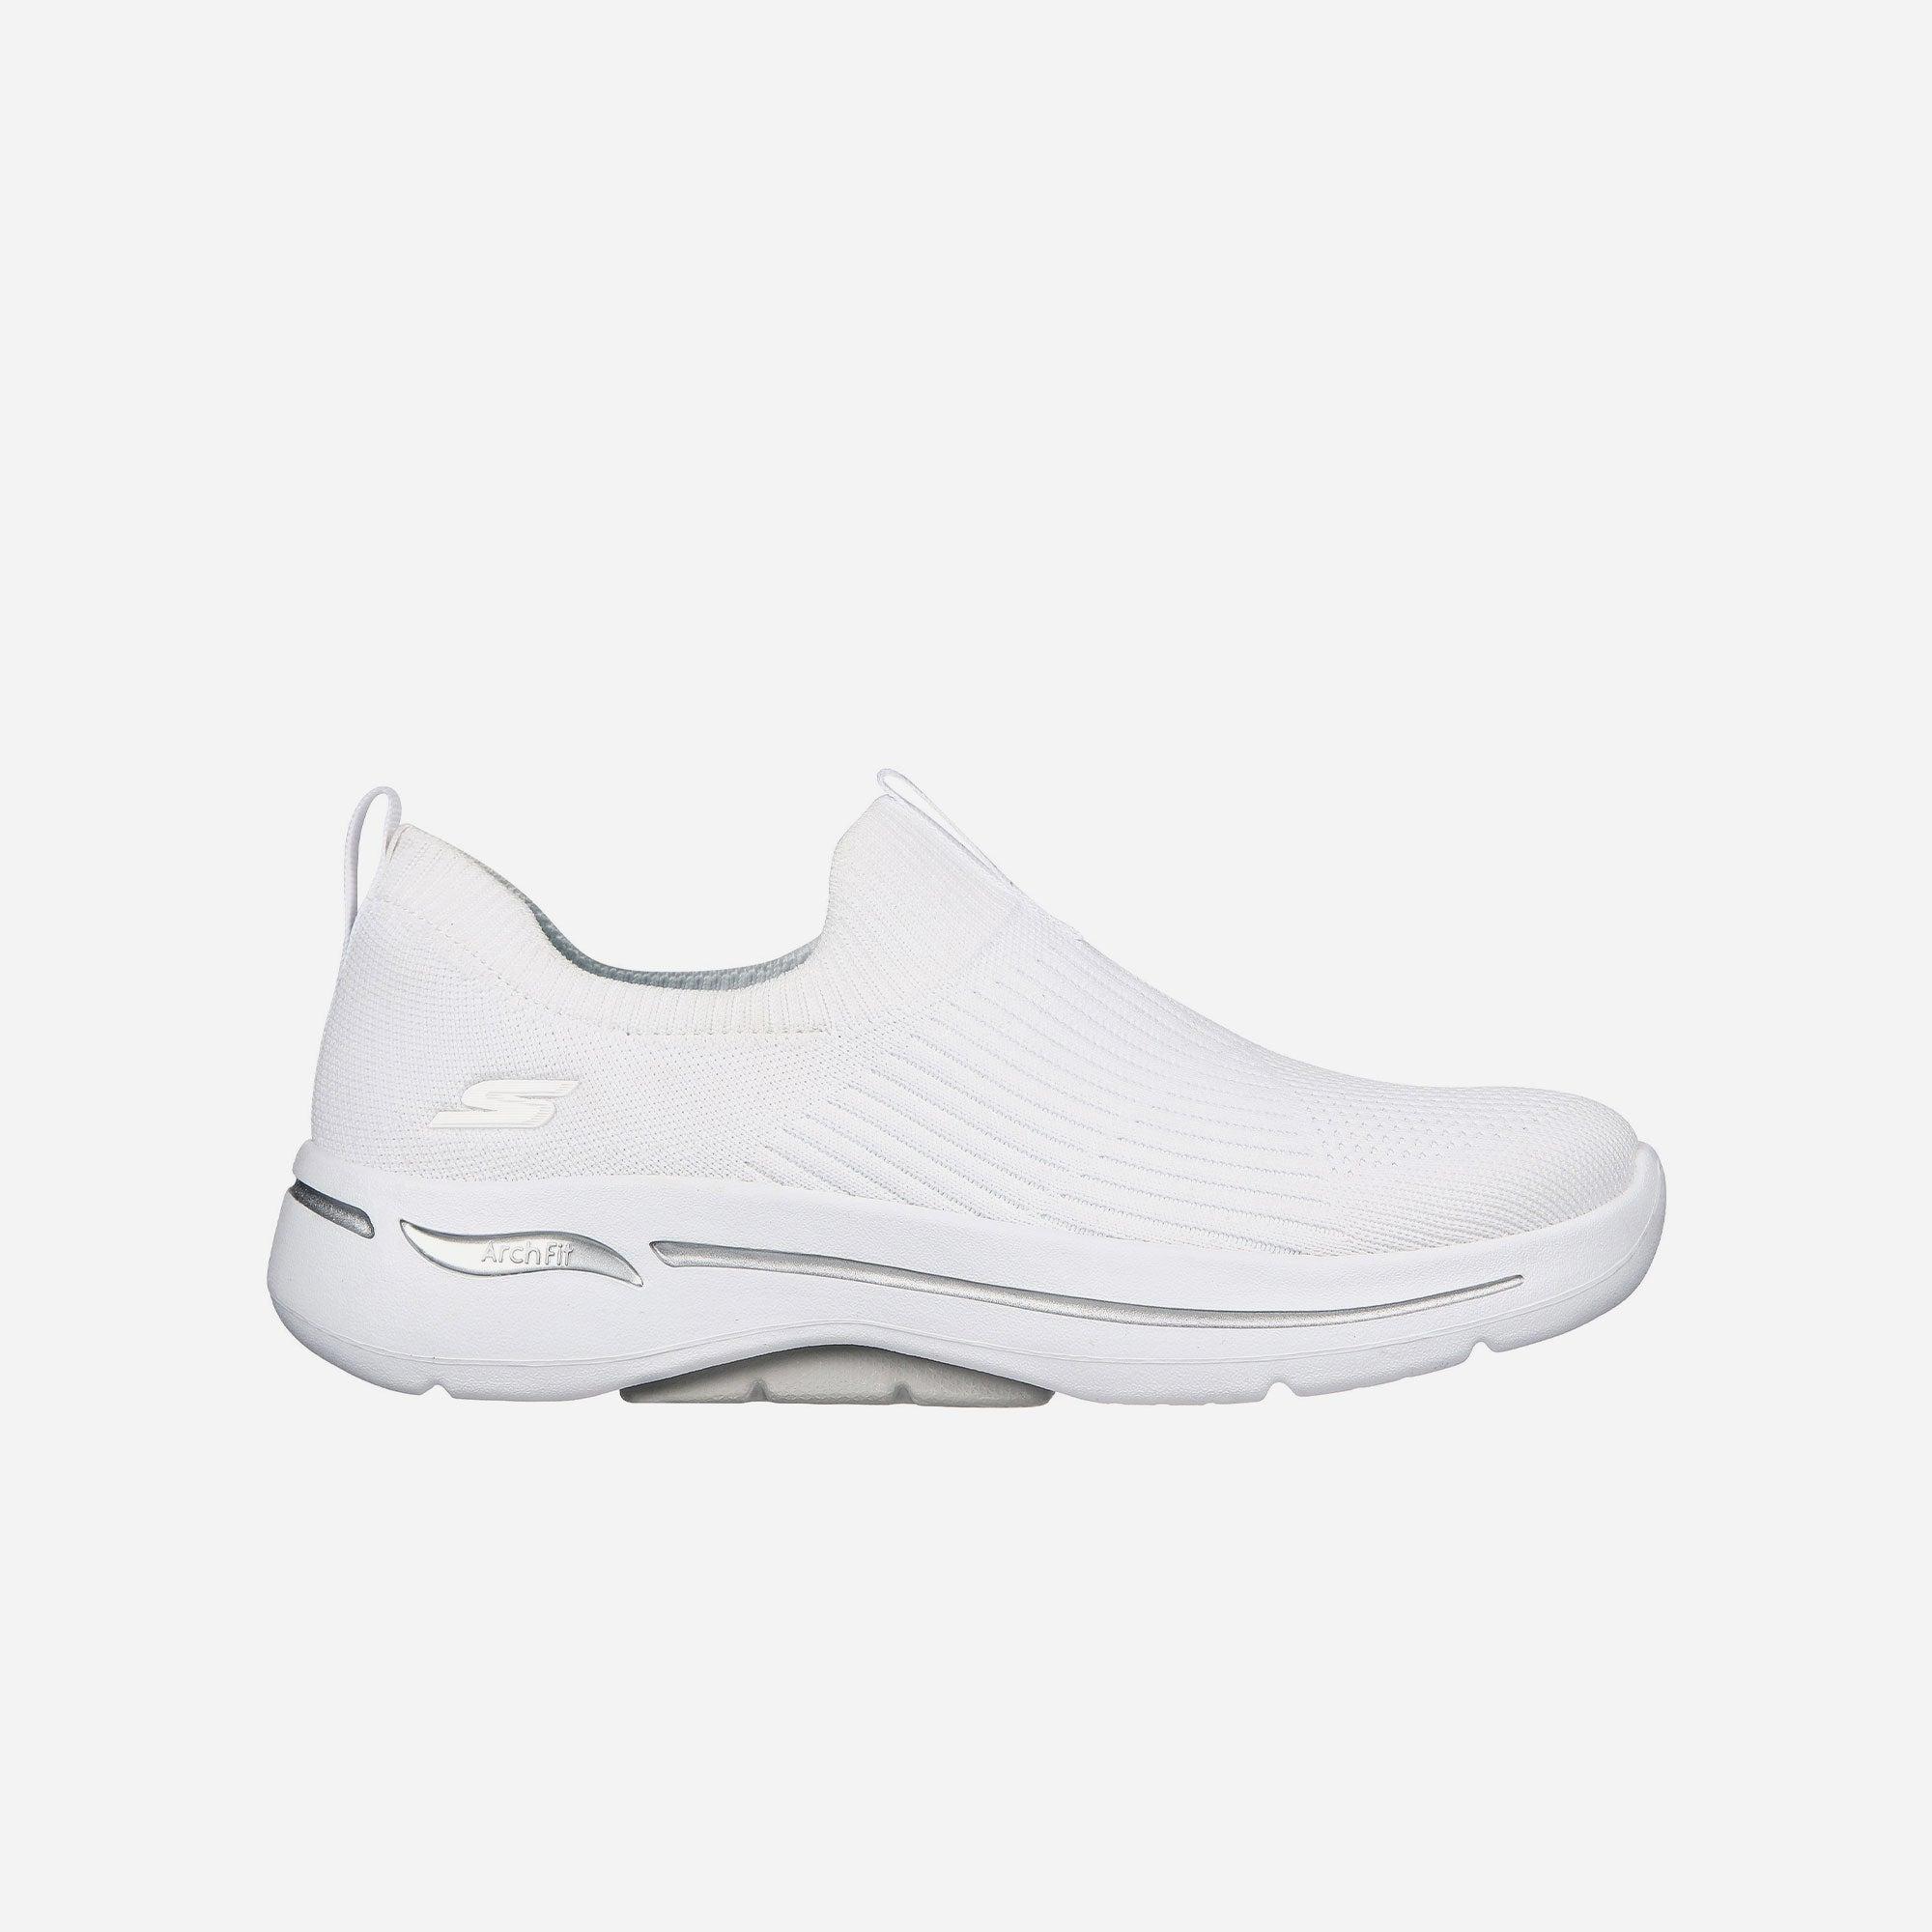 Giày thể thao nữ Skechers Go Walk Arch Fit - 124409-WHT